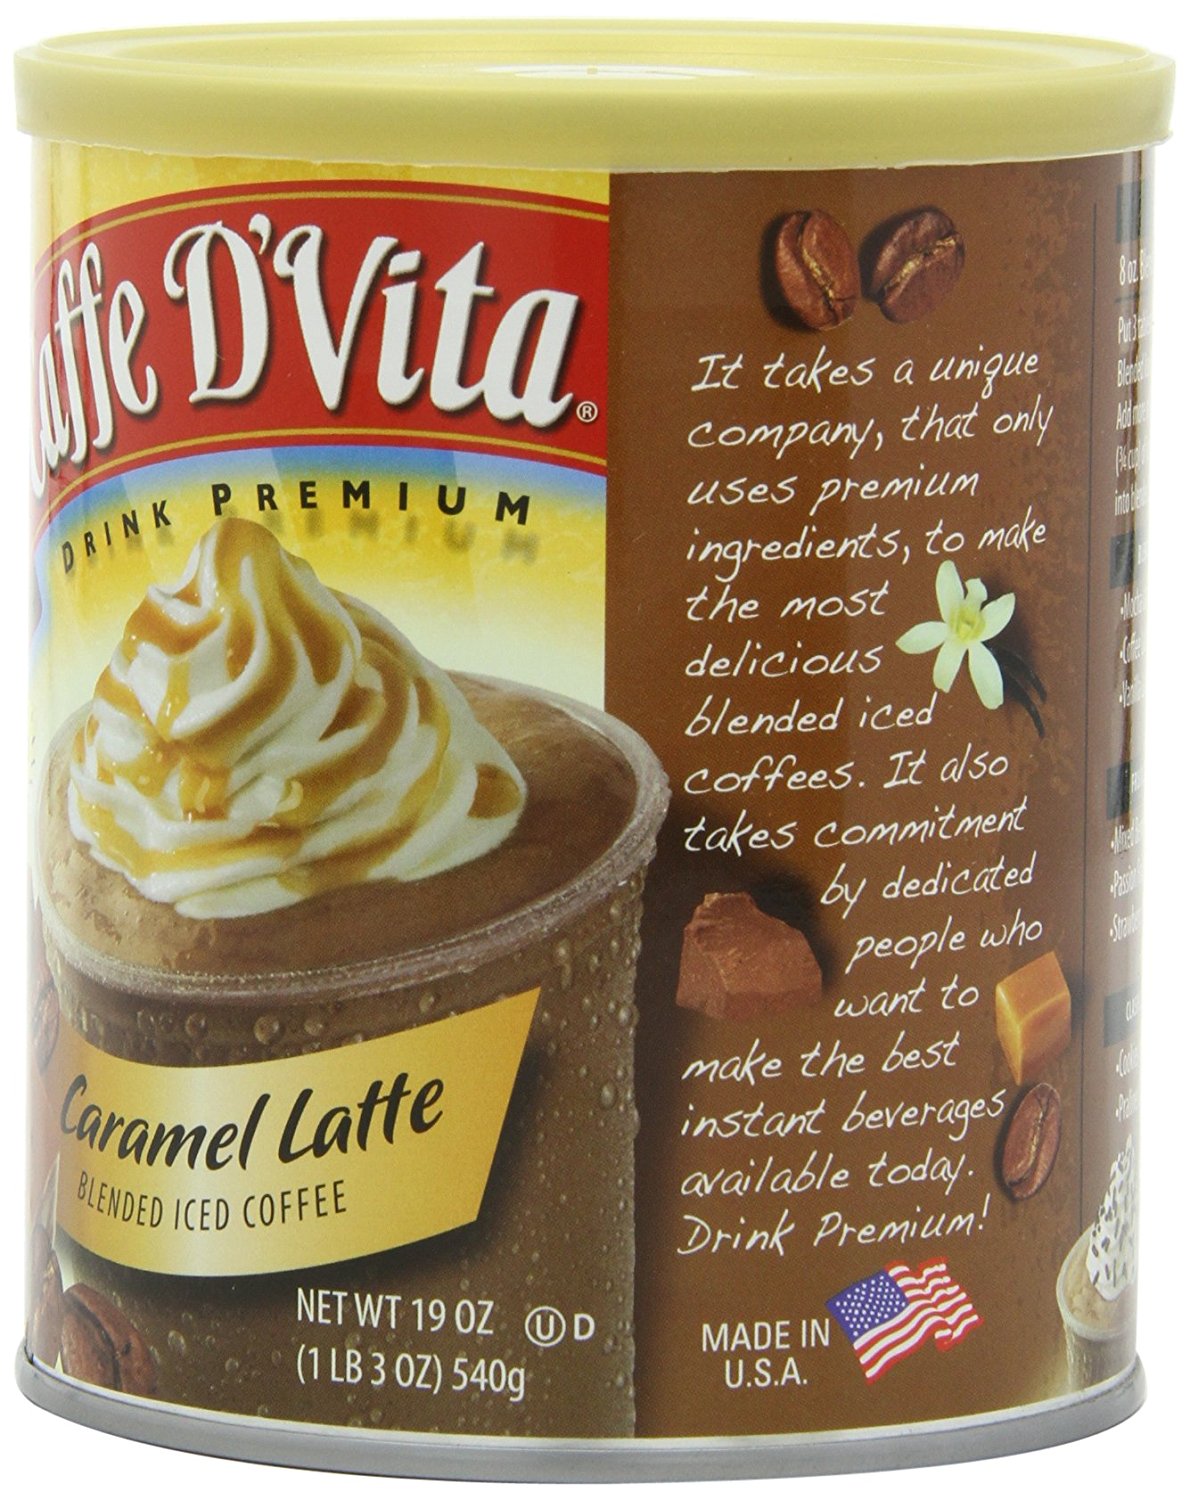 Picture of Caffe DVita F-DV-1C-06-CARM-IC Caramel Latte Blended Iced Coffee 6 1lb canisters